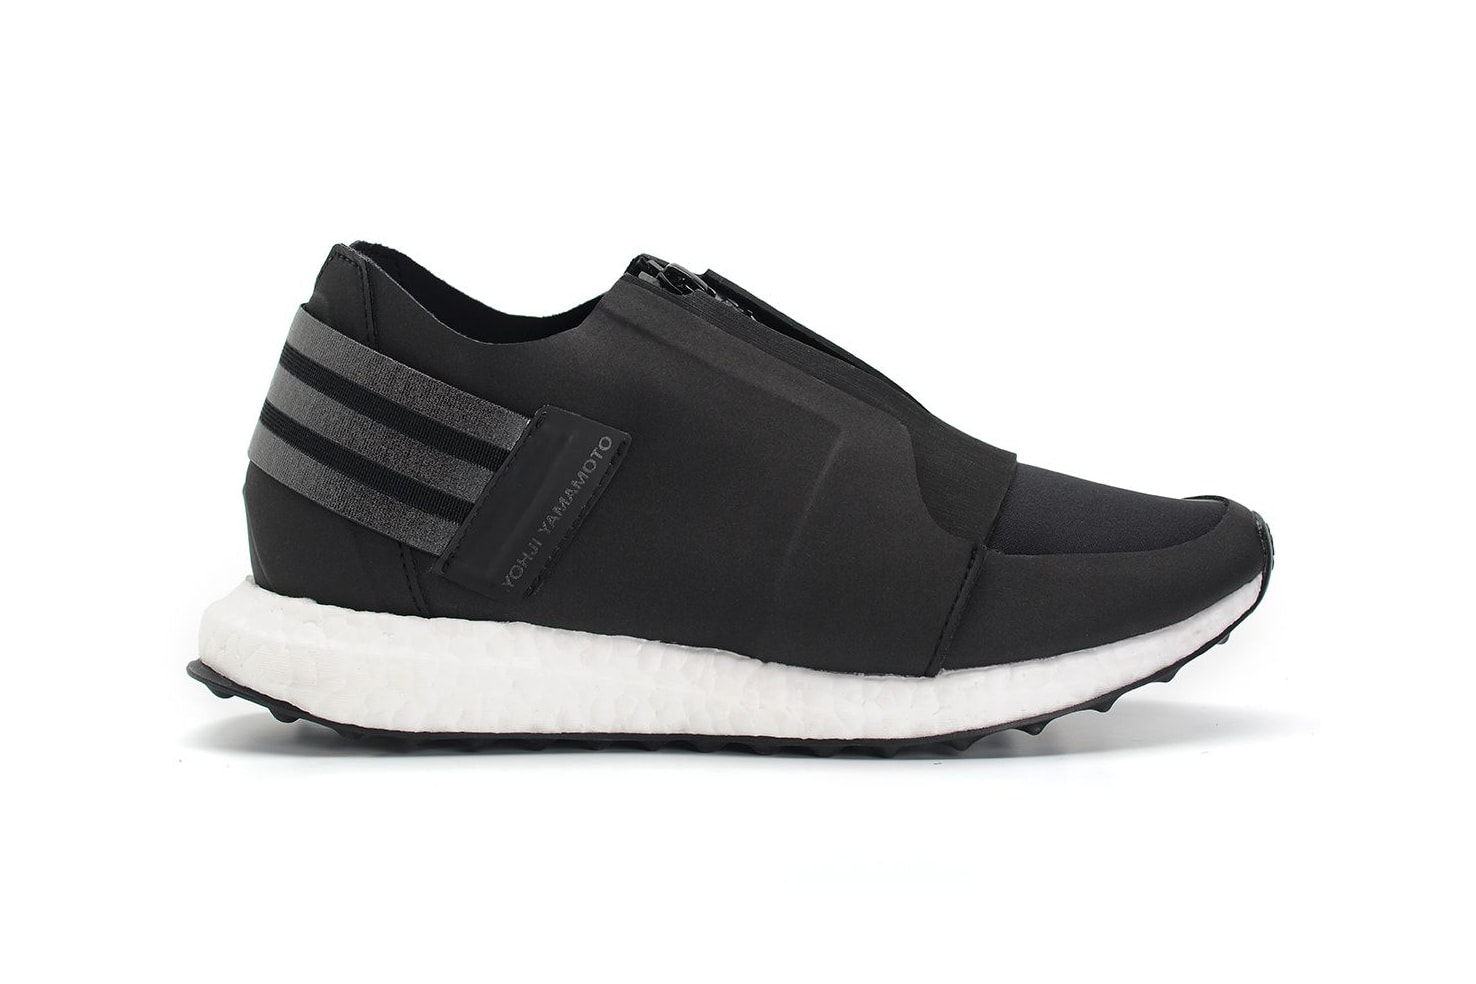 Y-3 X-Ray Zip Low BOOST “Core Black”